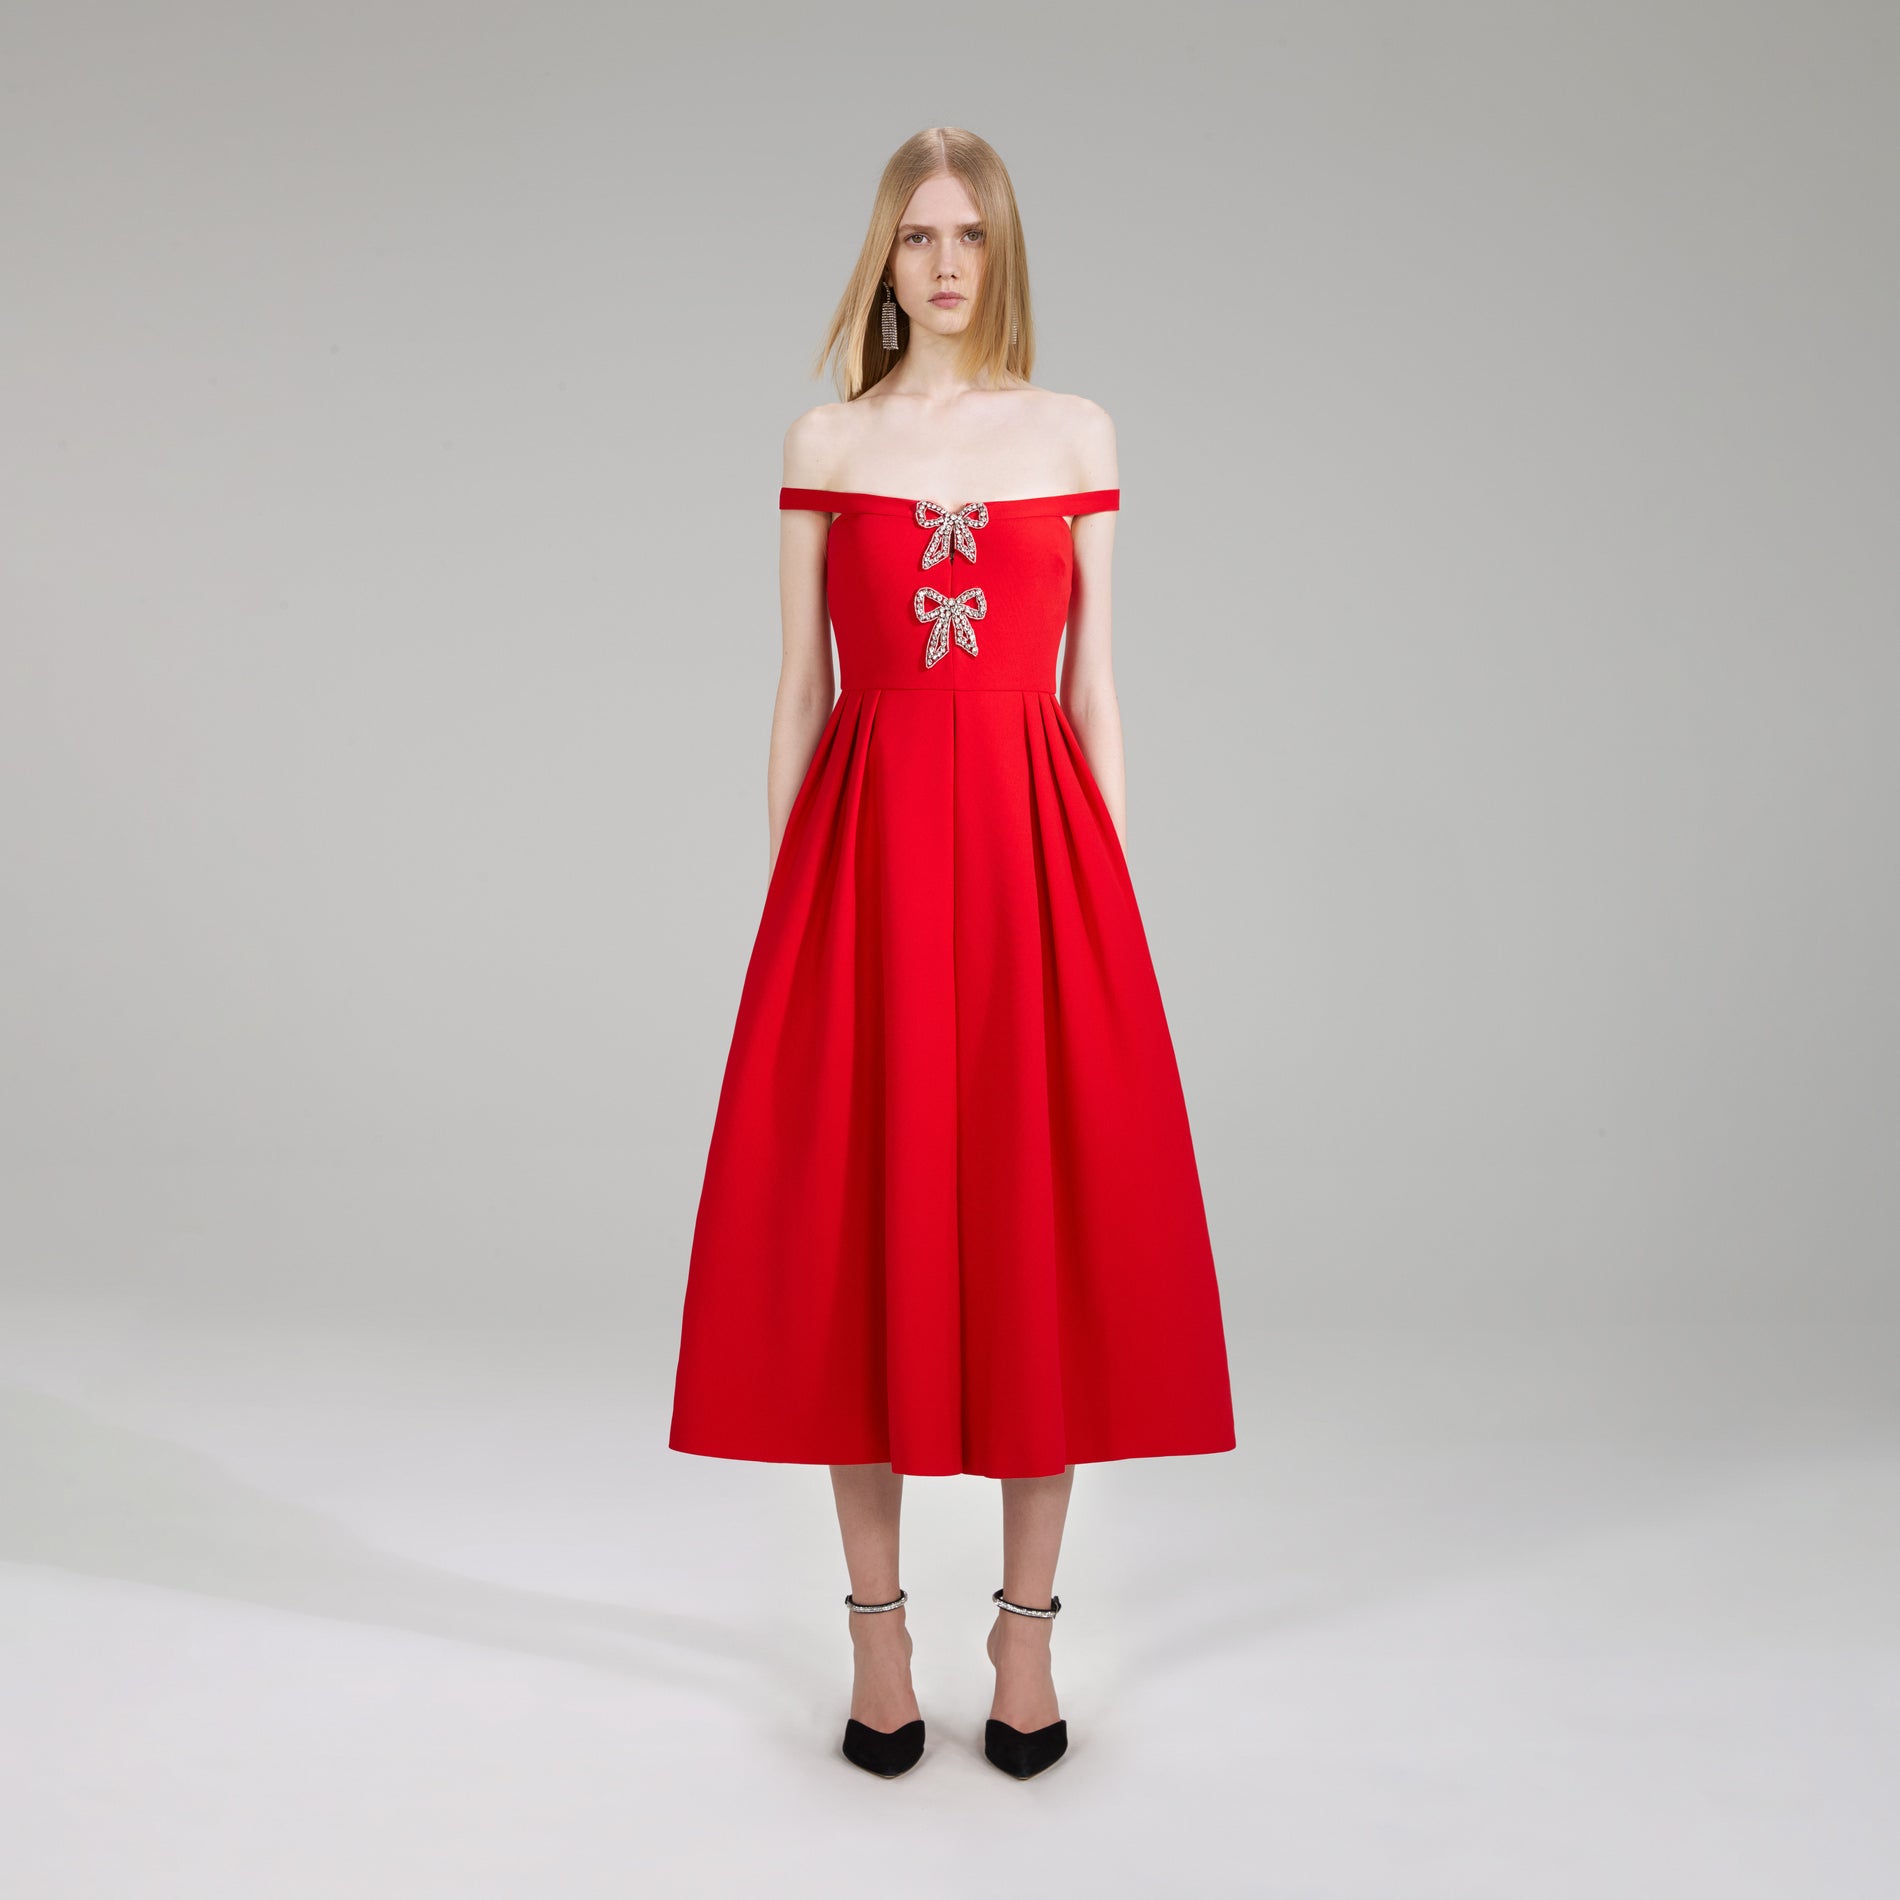 A woman wearing the Red Crepe Bow Midi Dress